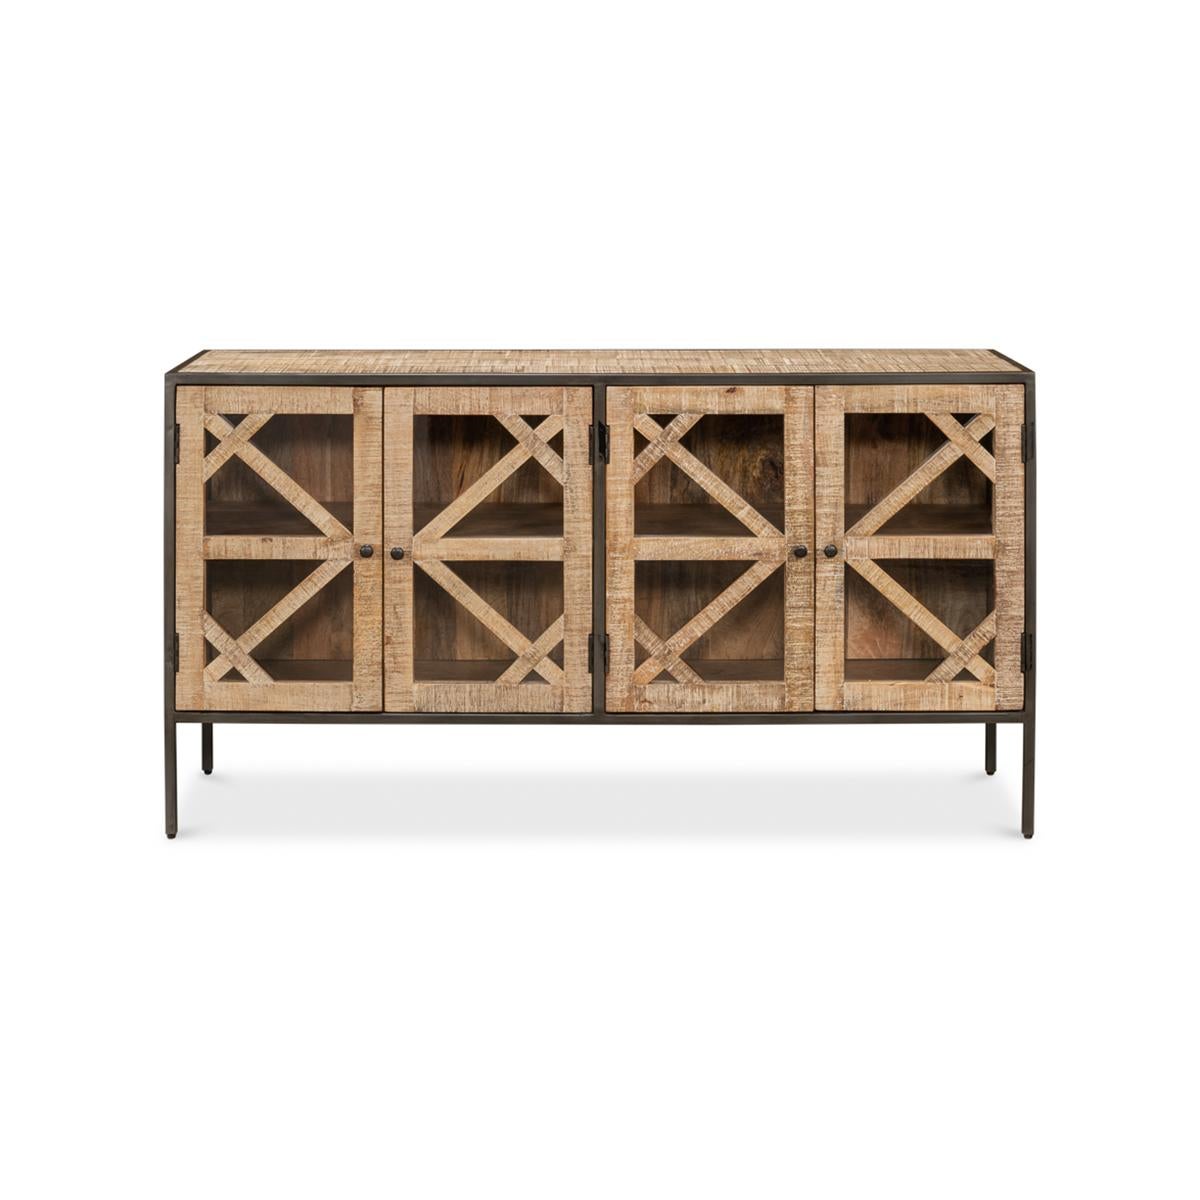 Rustic Geometric sideboard, with a graphic wood overlay pattern covering all four glass doors in a highly durable sienna finish, is a classic focal point for any room in the home. The four-door cabinet is fitted with interior shelves and has an iron